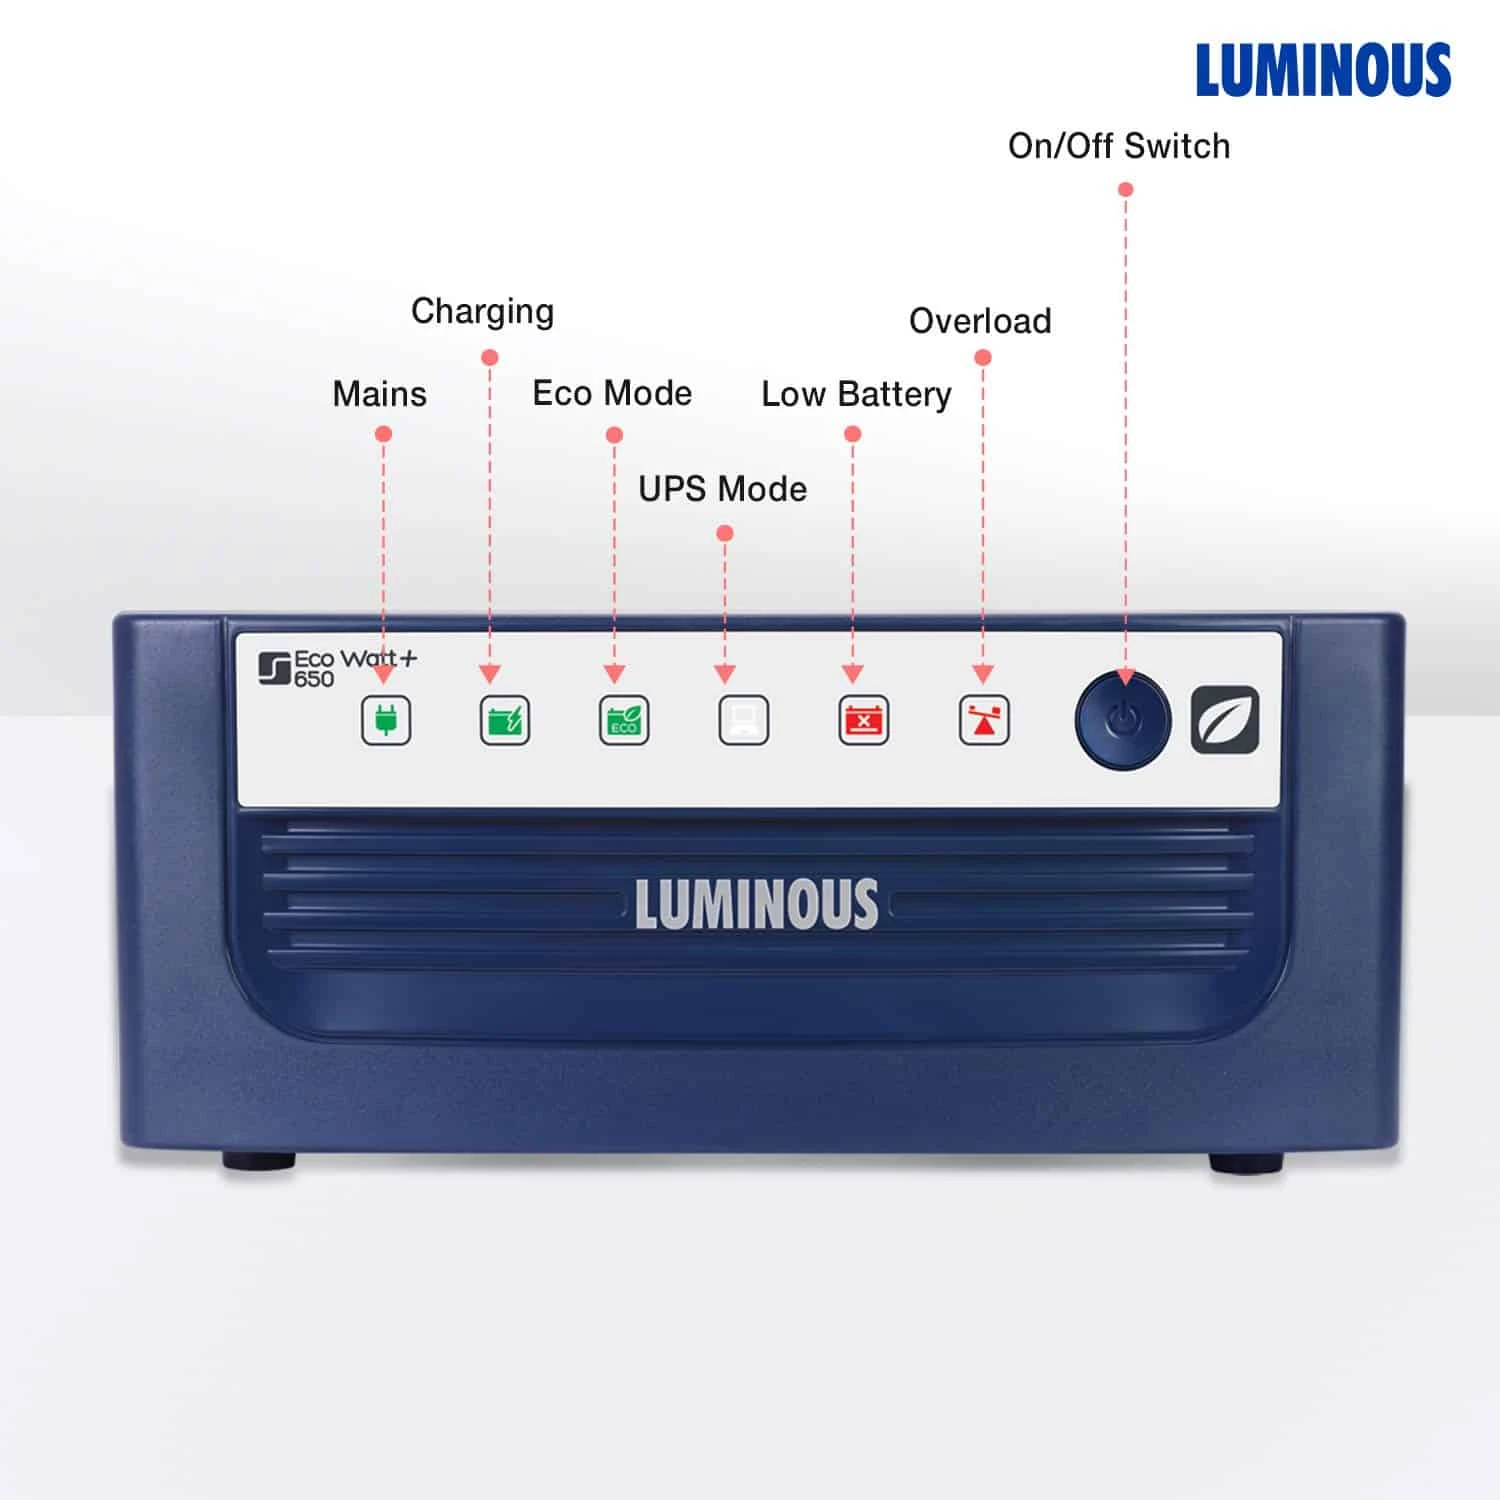 Luminous Eco Watt Neo 700 Square Wave Inverter for Home, Office and Shops